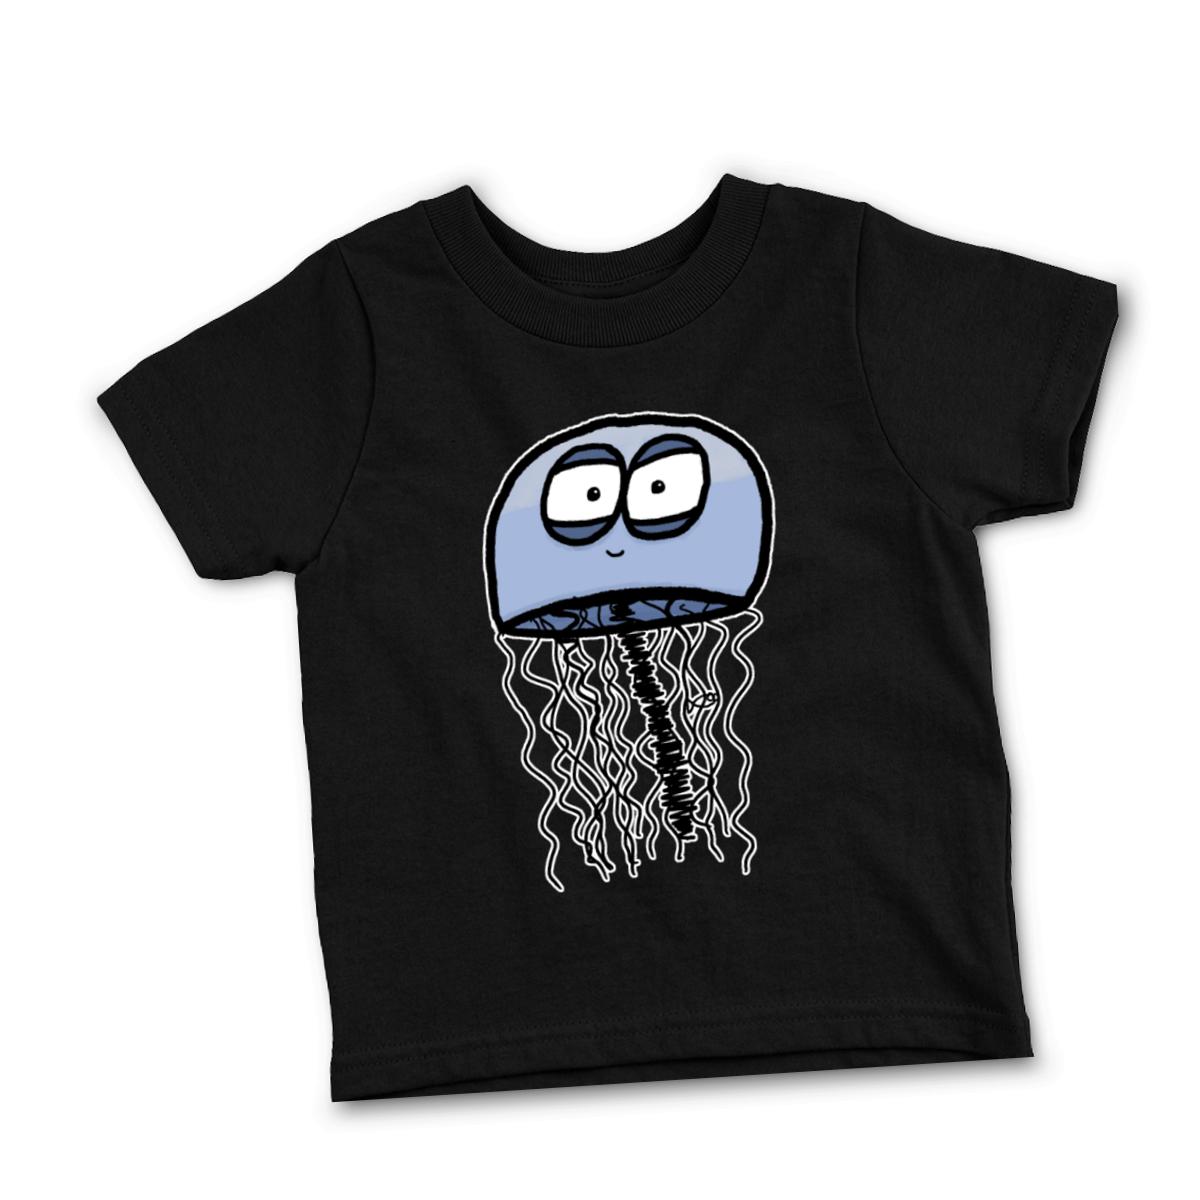 Jelly Fish Toddler Tee 2T black